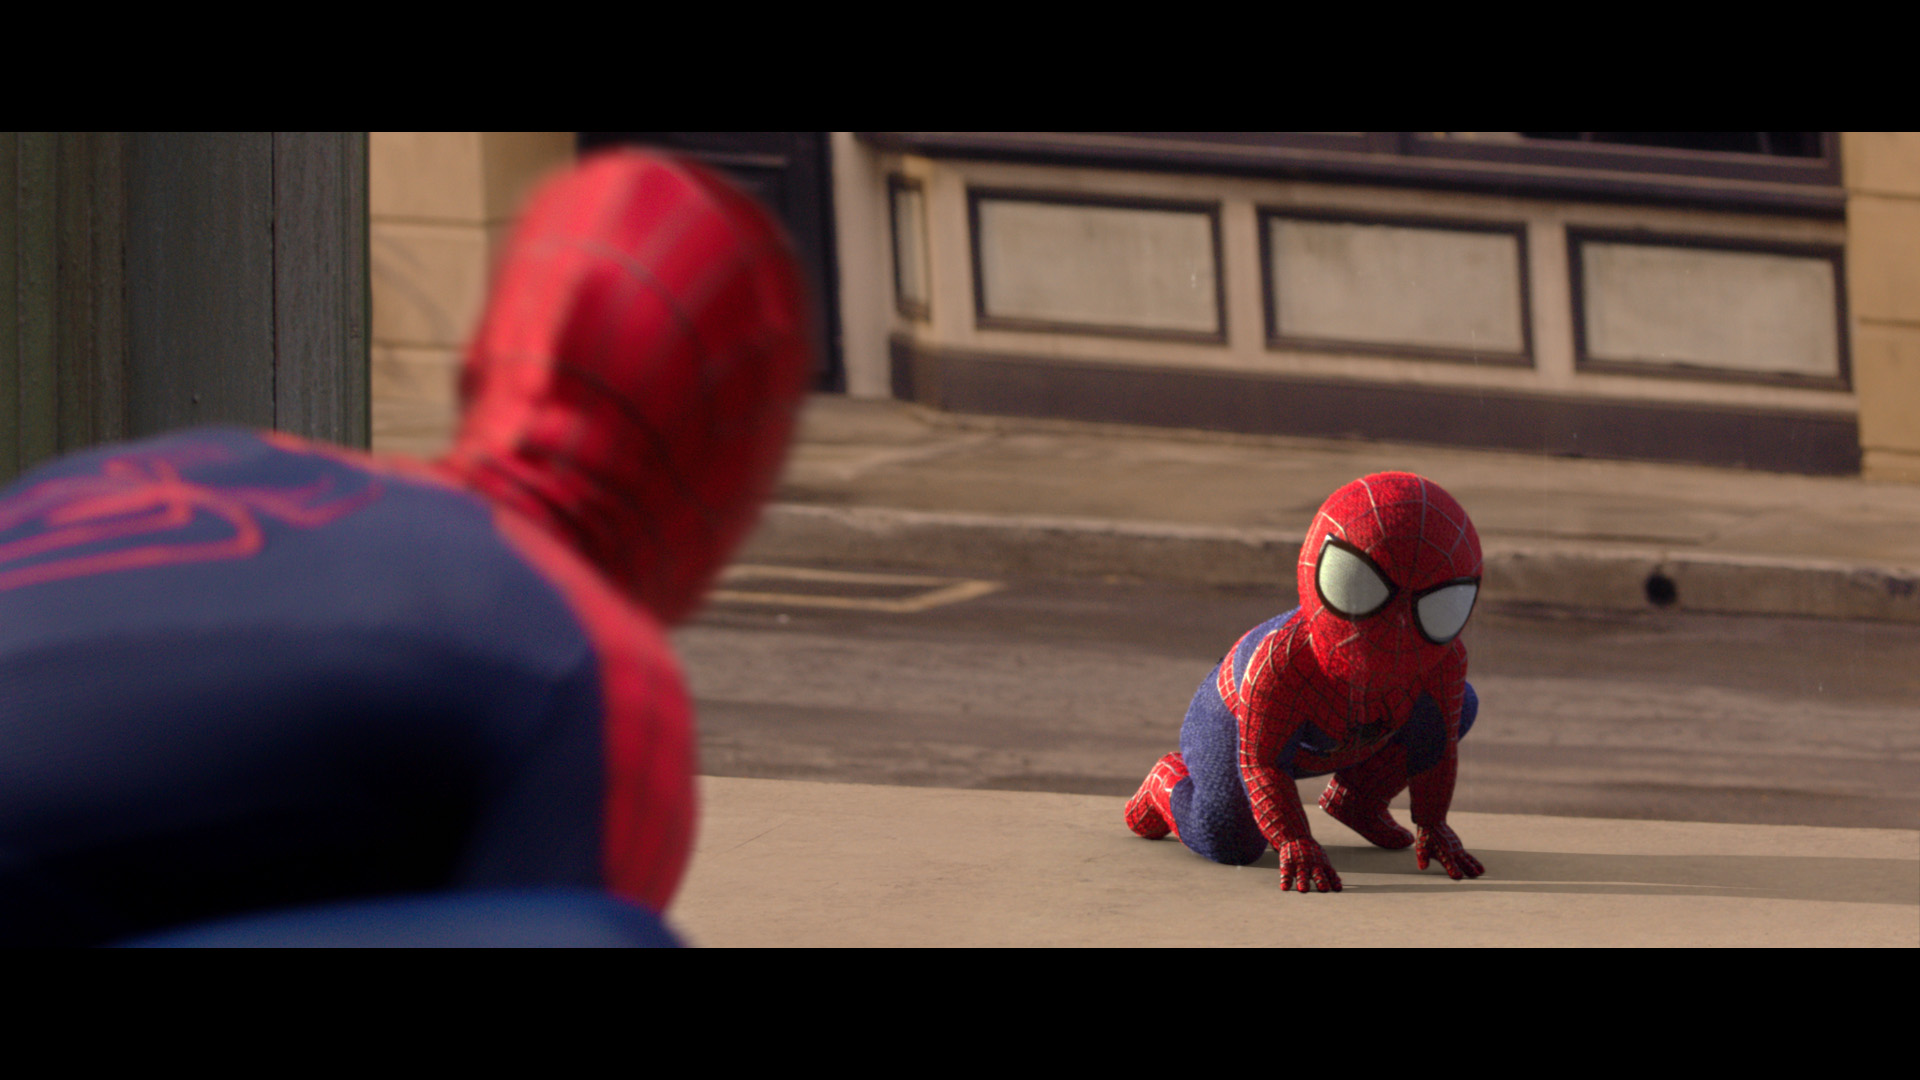 Evian “The Amazing Baby & Me 2” Featuring Spider-Man